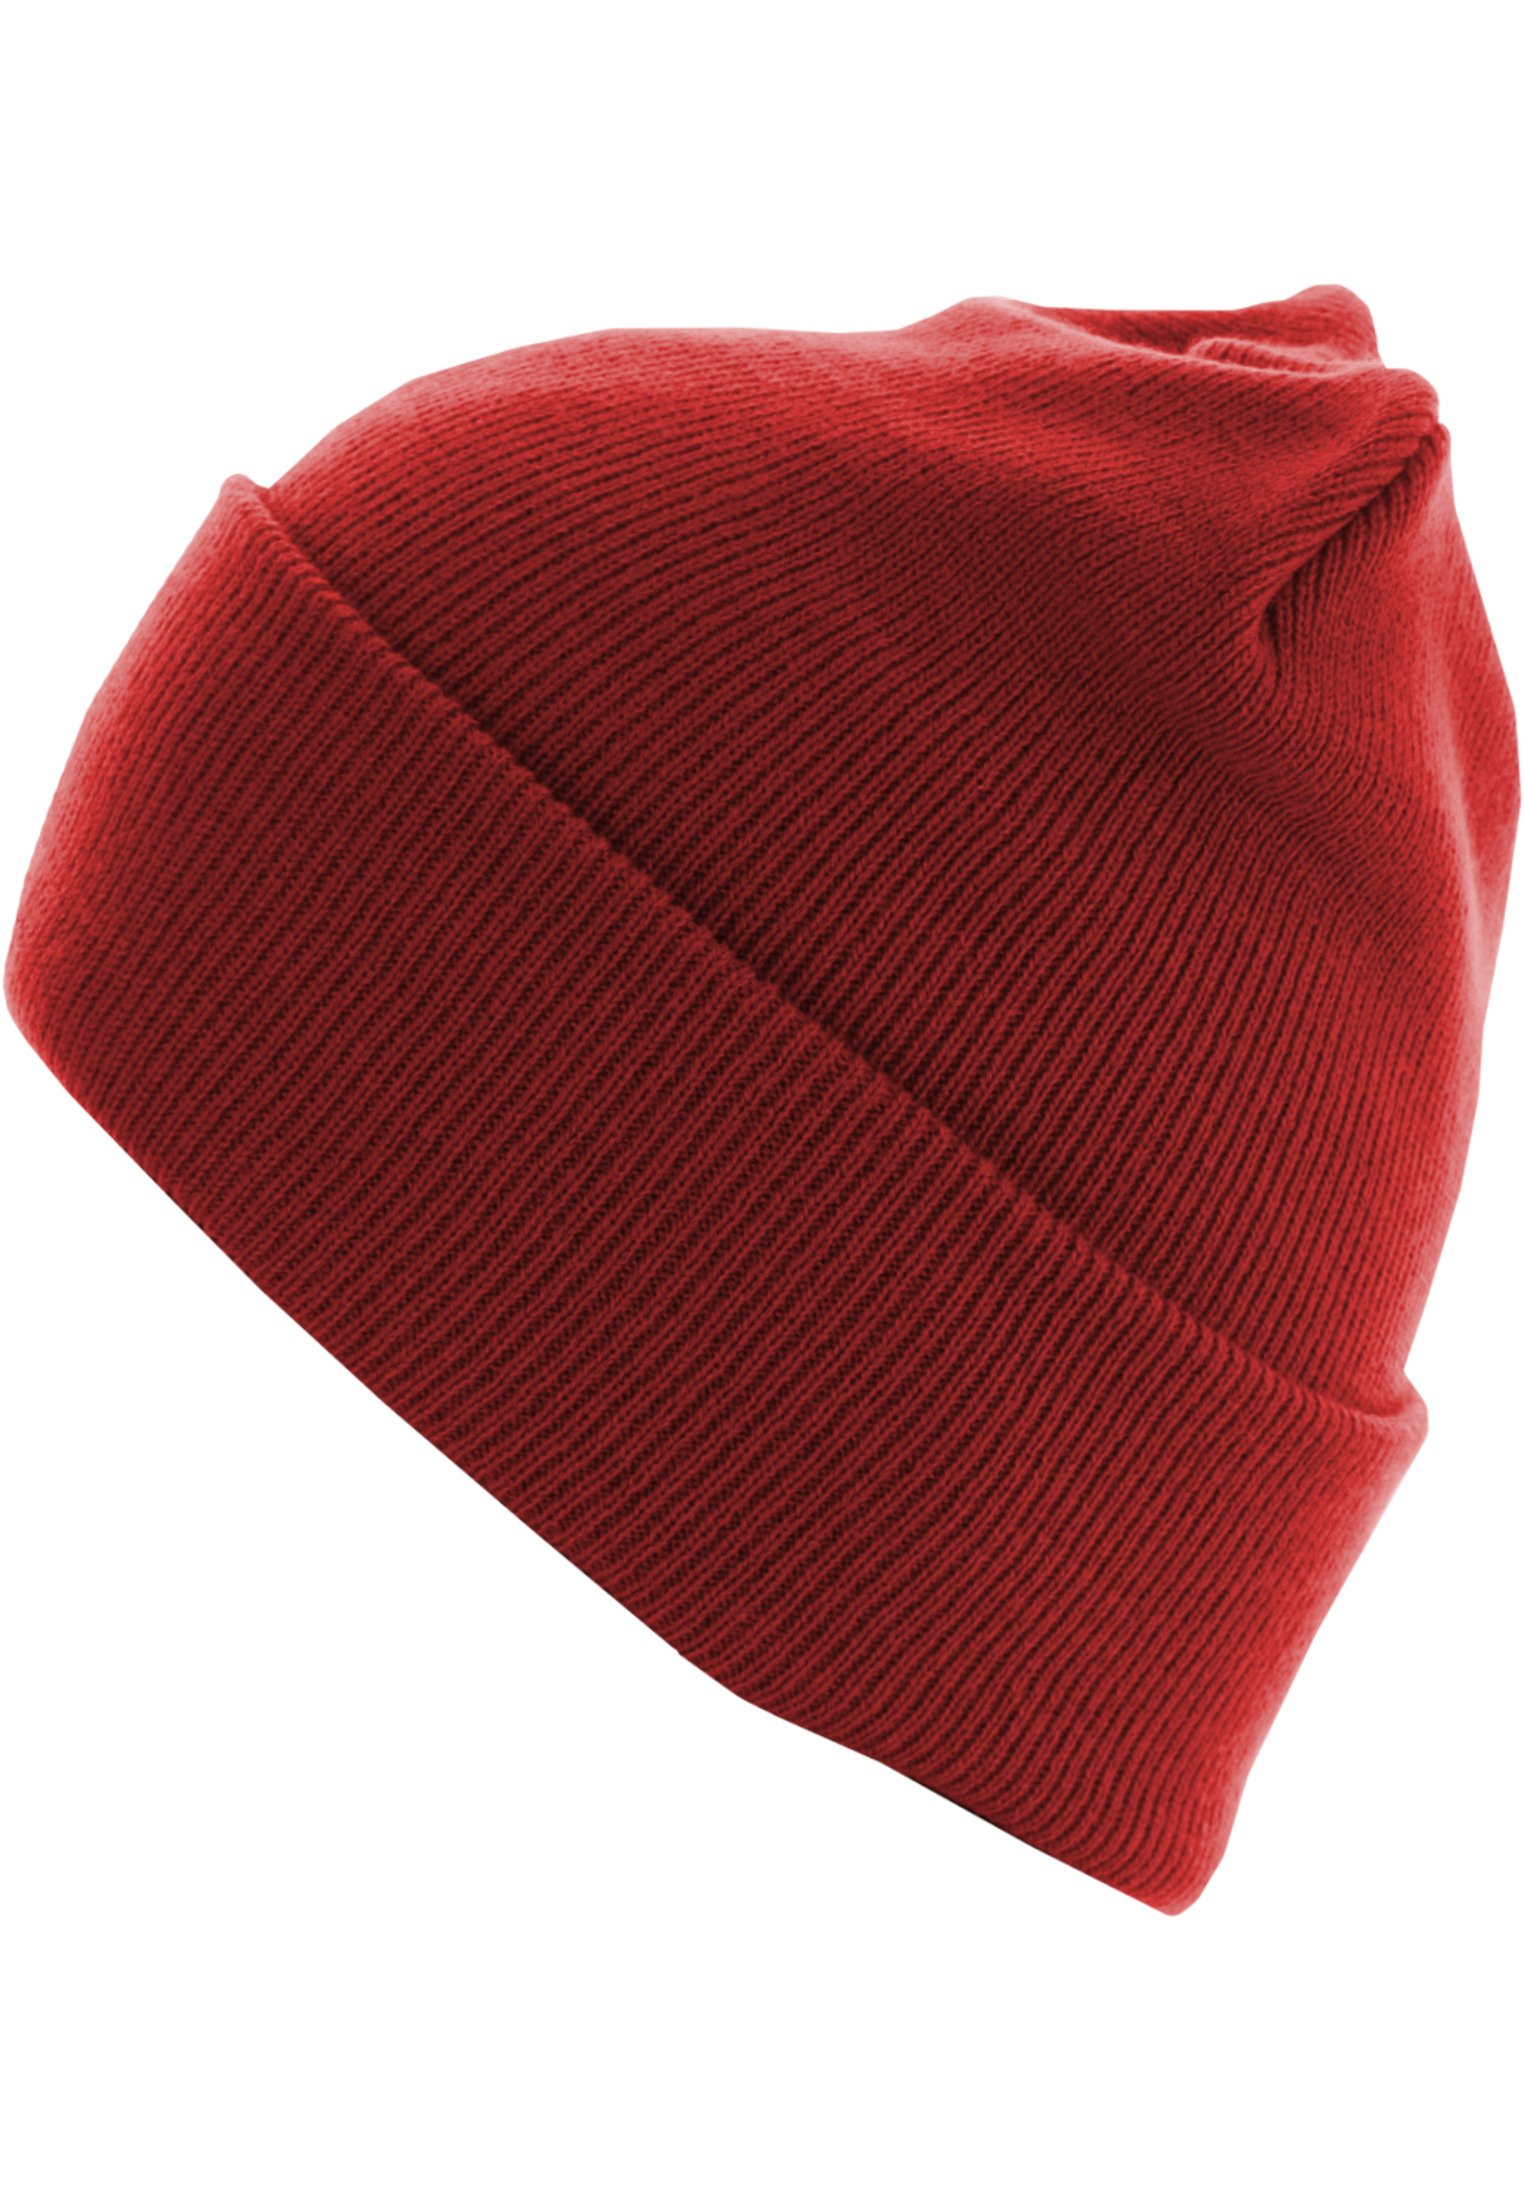 Beanie Basic Flap Long Version red one size